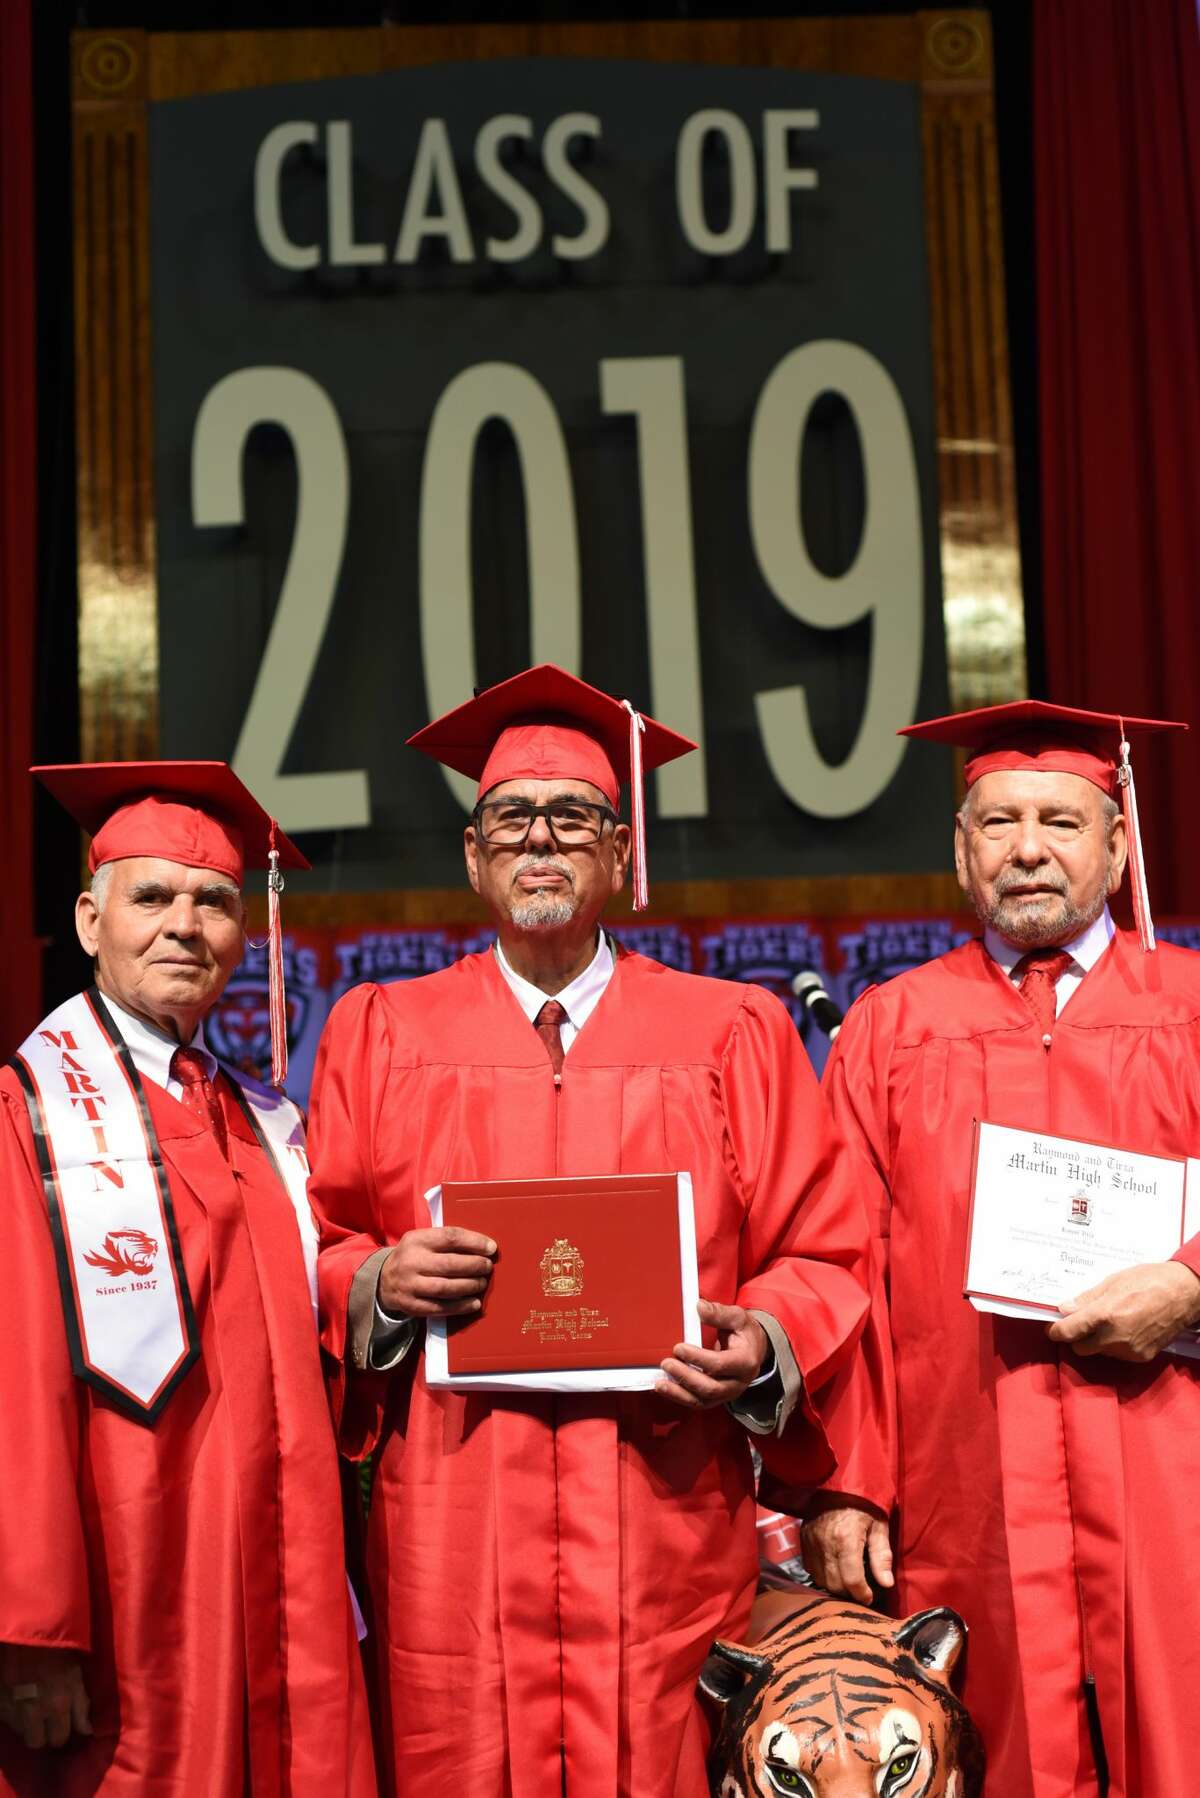 U.S. Veterans Miguel Romo, Dogberto Carmona and Roque Vela Sr. stand with their High School degrees during Martin High School's graduation at Sames Auto Arena, Thursday, May 30, 2019.